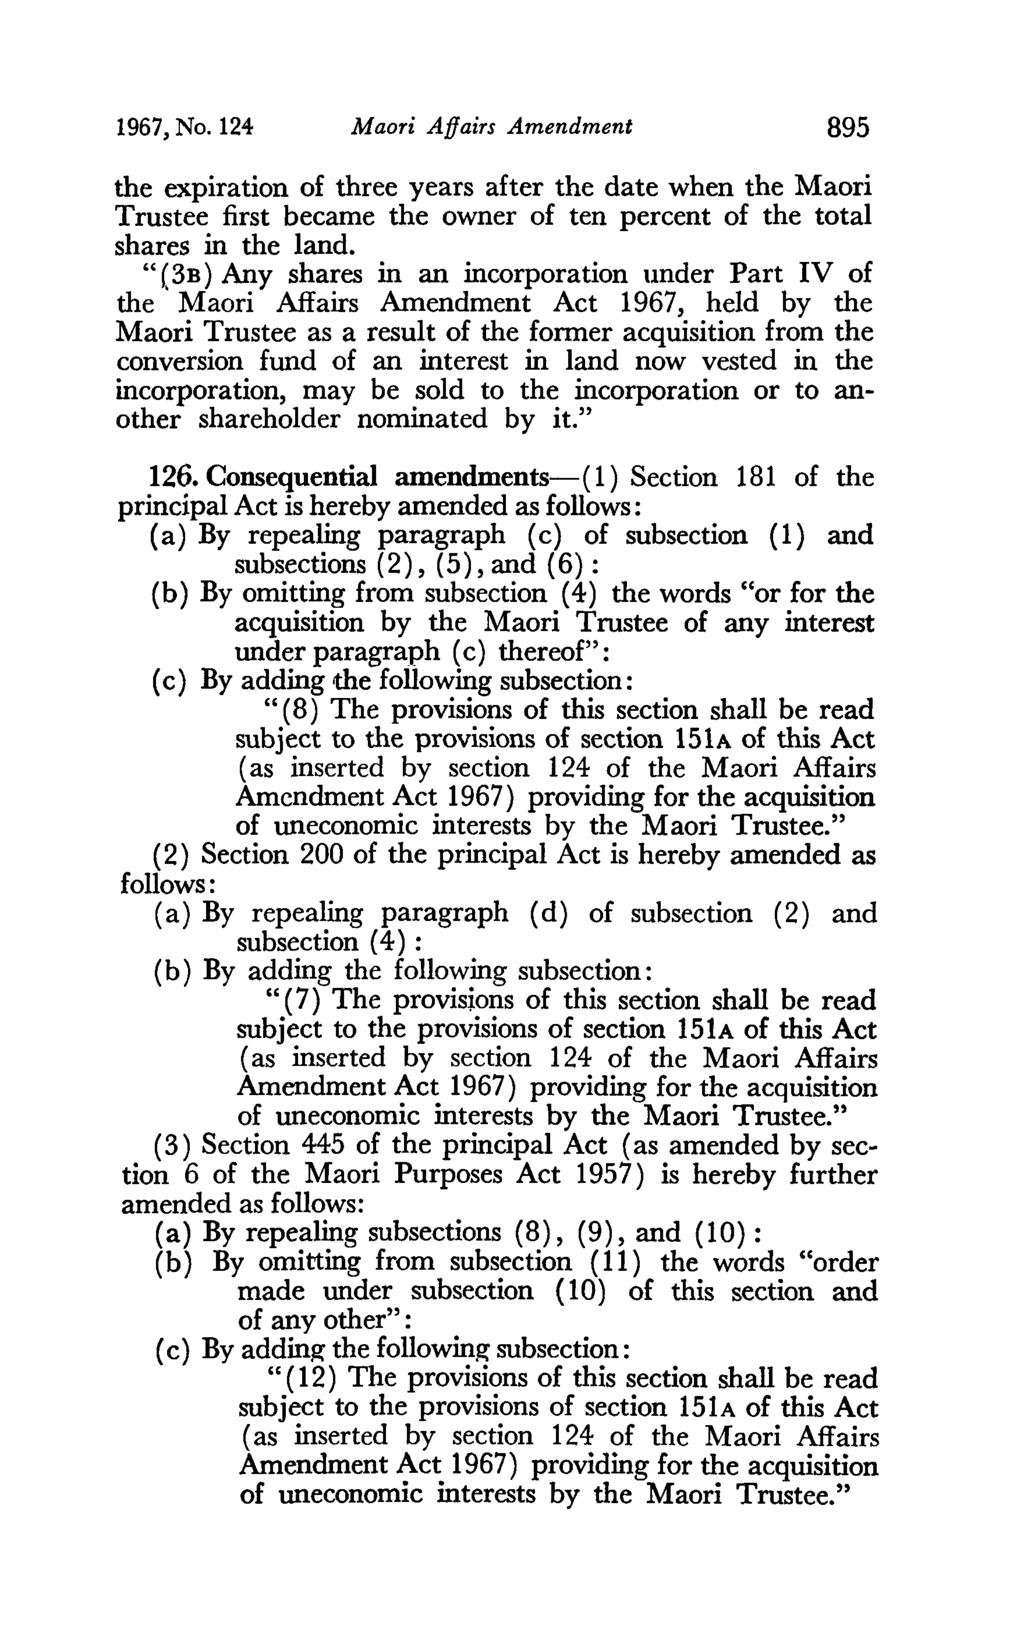 1967, No. 124 Maori Affairs Amendment 895 the expiration of three years after the date when the Maori Trustee first became the owner of ten percent of the total shares in the land.